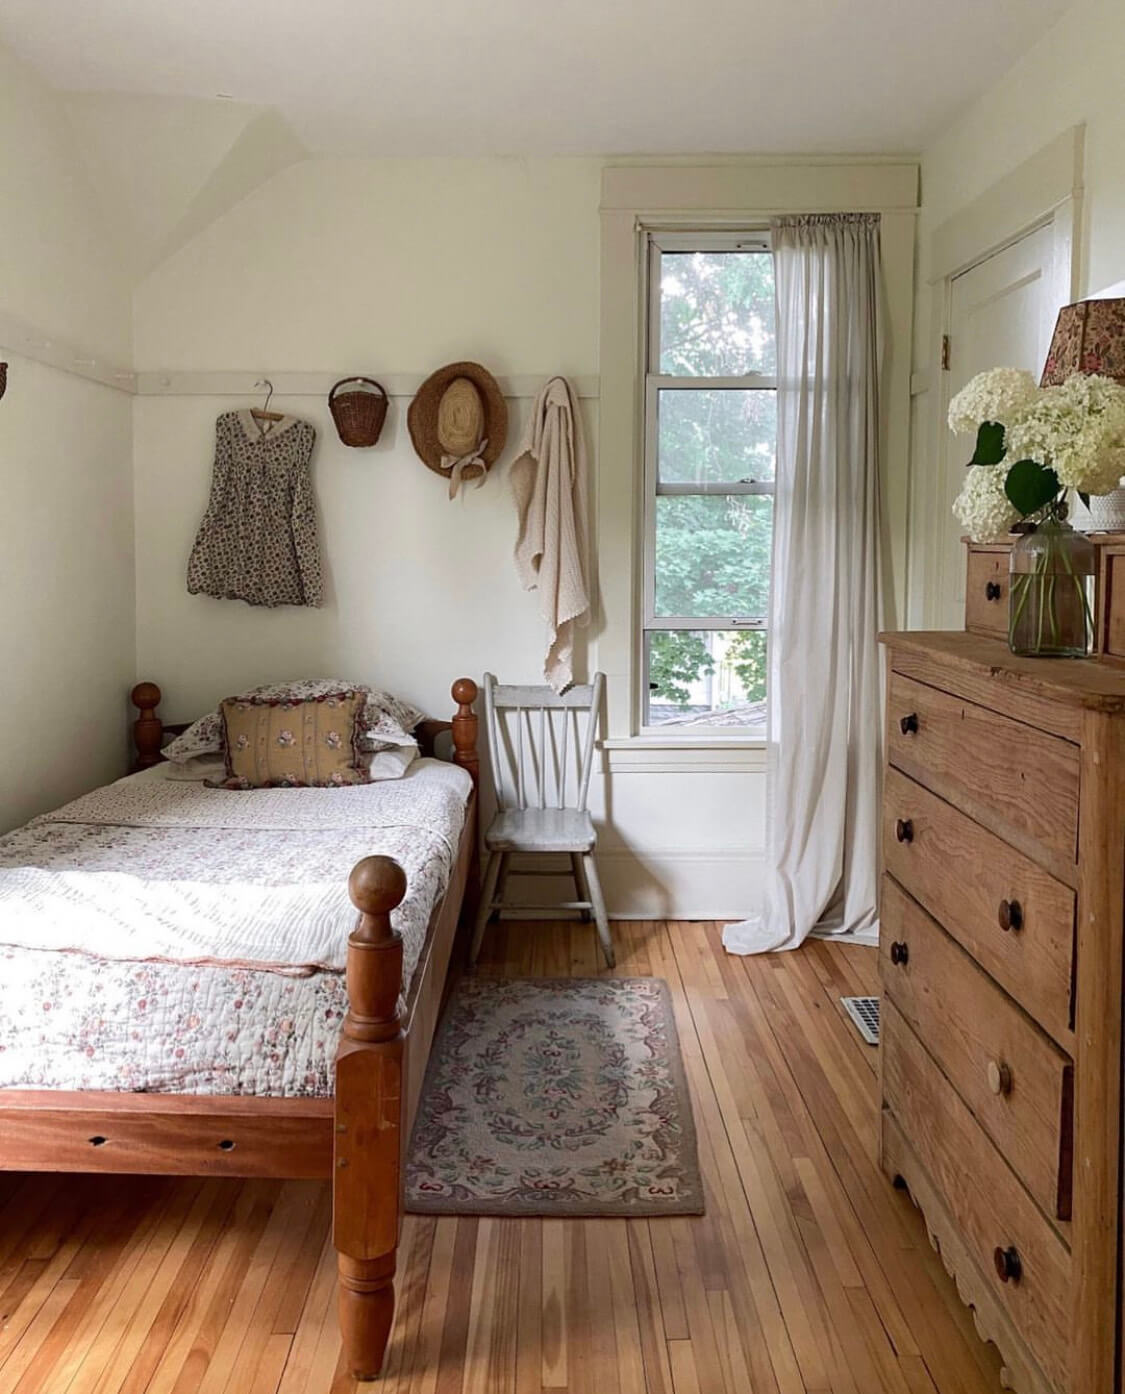 Child's bedroom decorated in a rustic style with bare wooden furniture and vintage finds. 